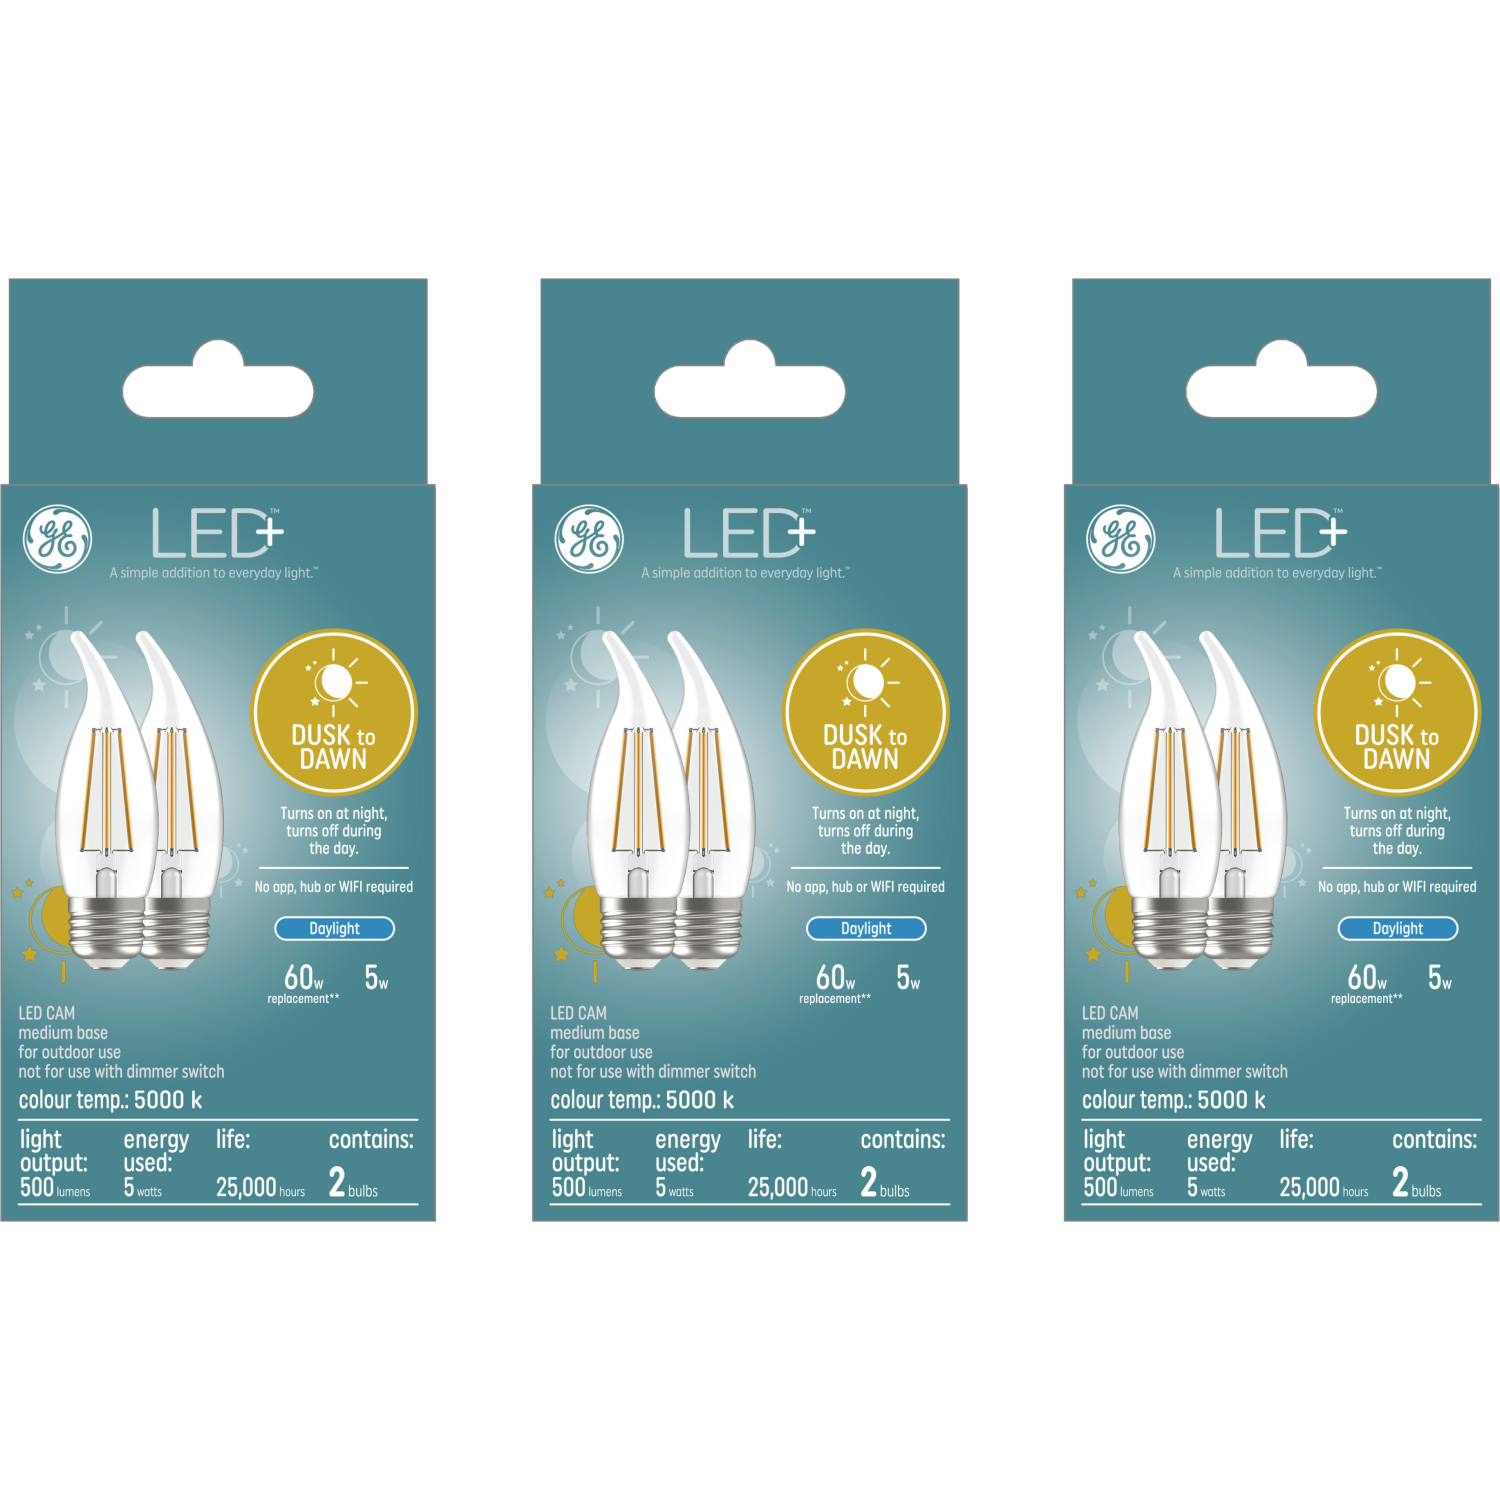 GE Lighting LED+ Dusk to Dawn 60W Replacement Daylight Decorative E26 Base CAM Light Bulbs (Includes THREE 2-packs)